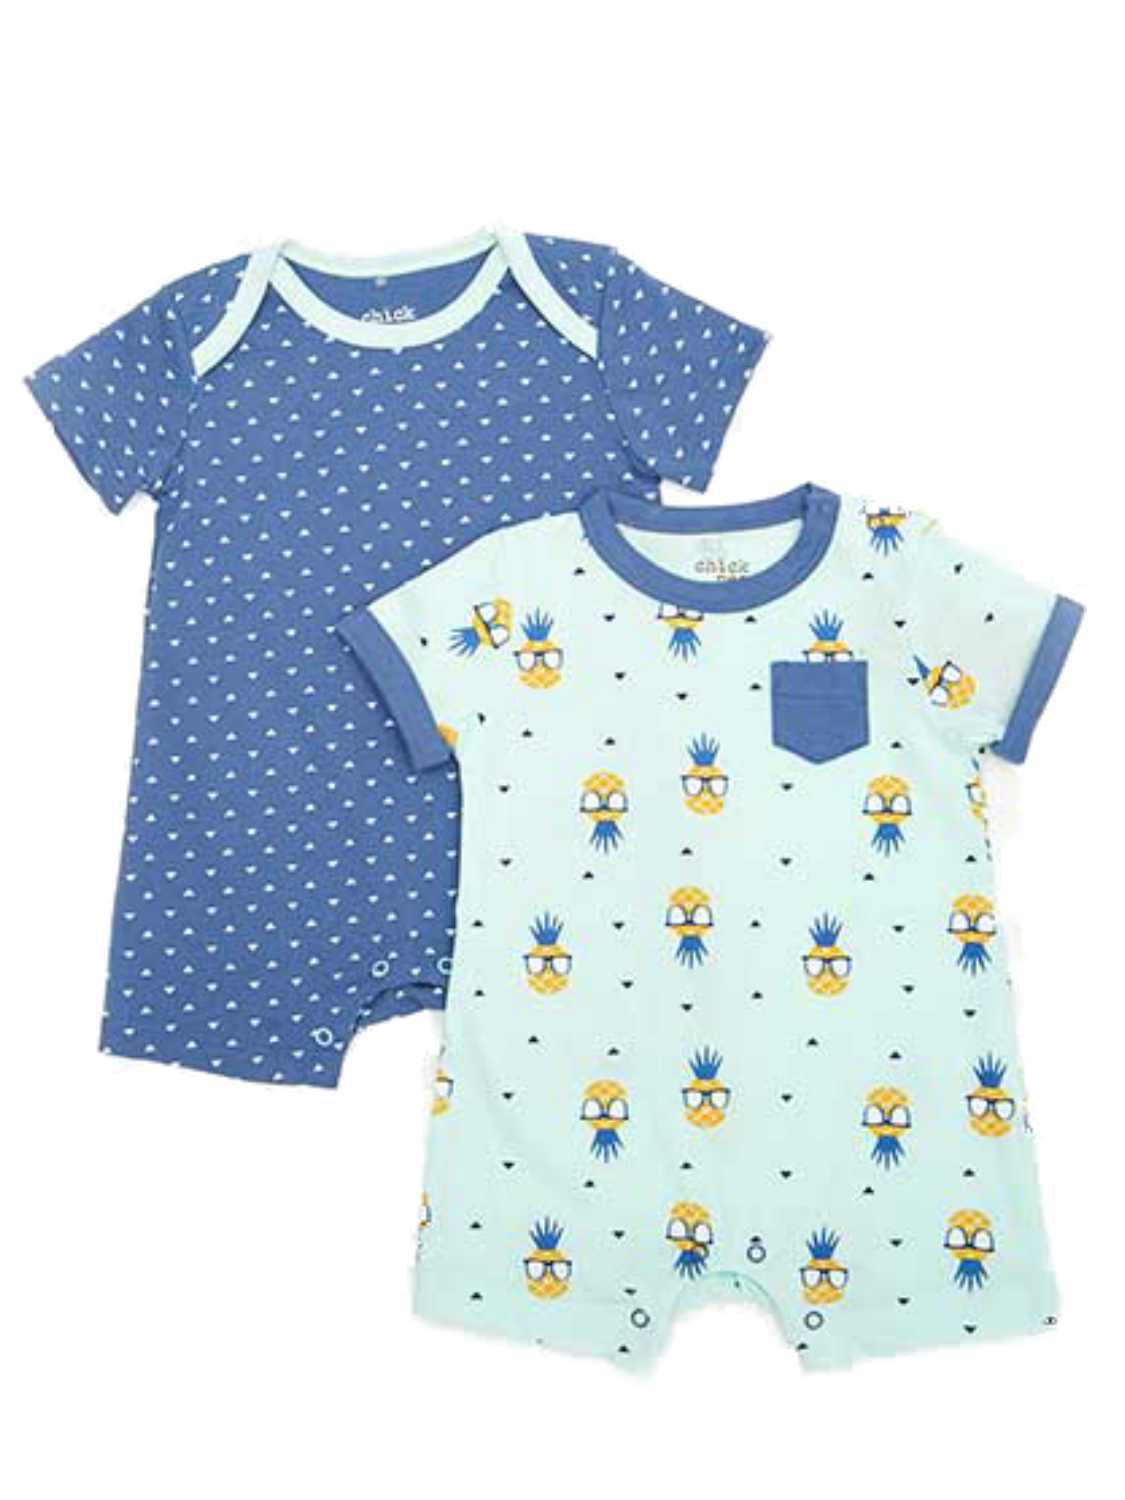 chick pea baby clothes